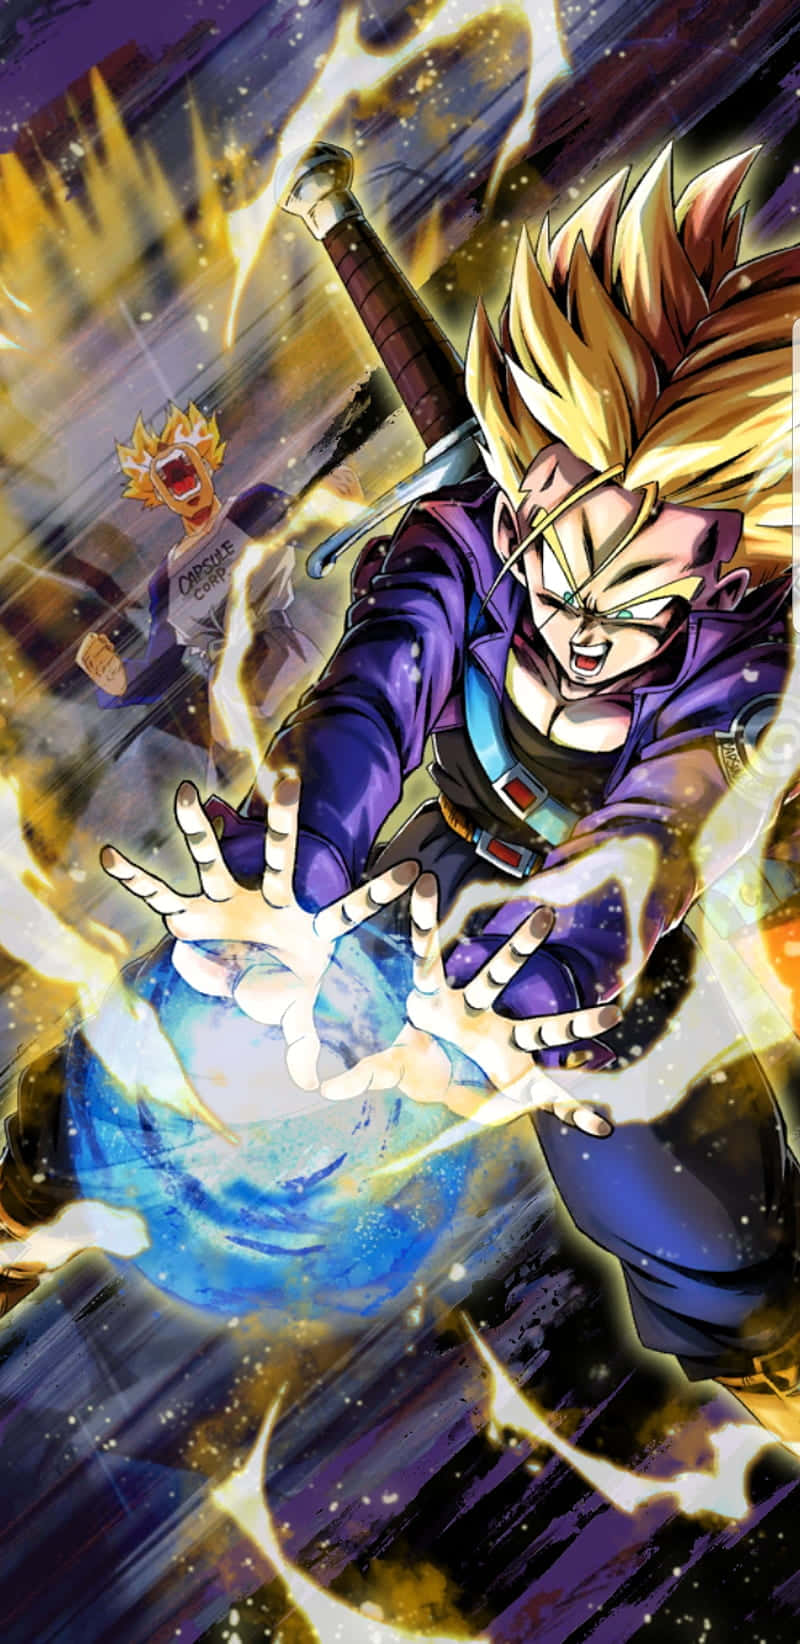 Trunks from the anime Dragon Ball Z locks eyes with the approaching enemy. Wallpaper